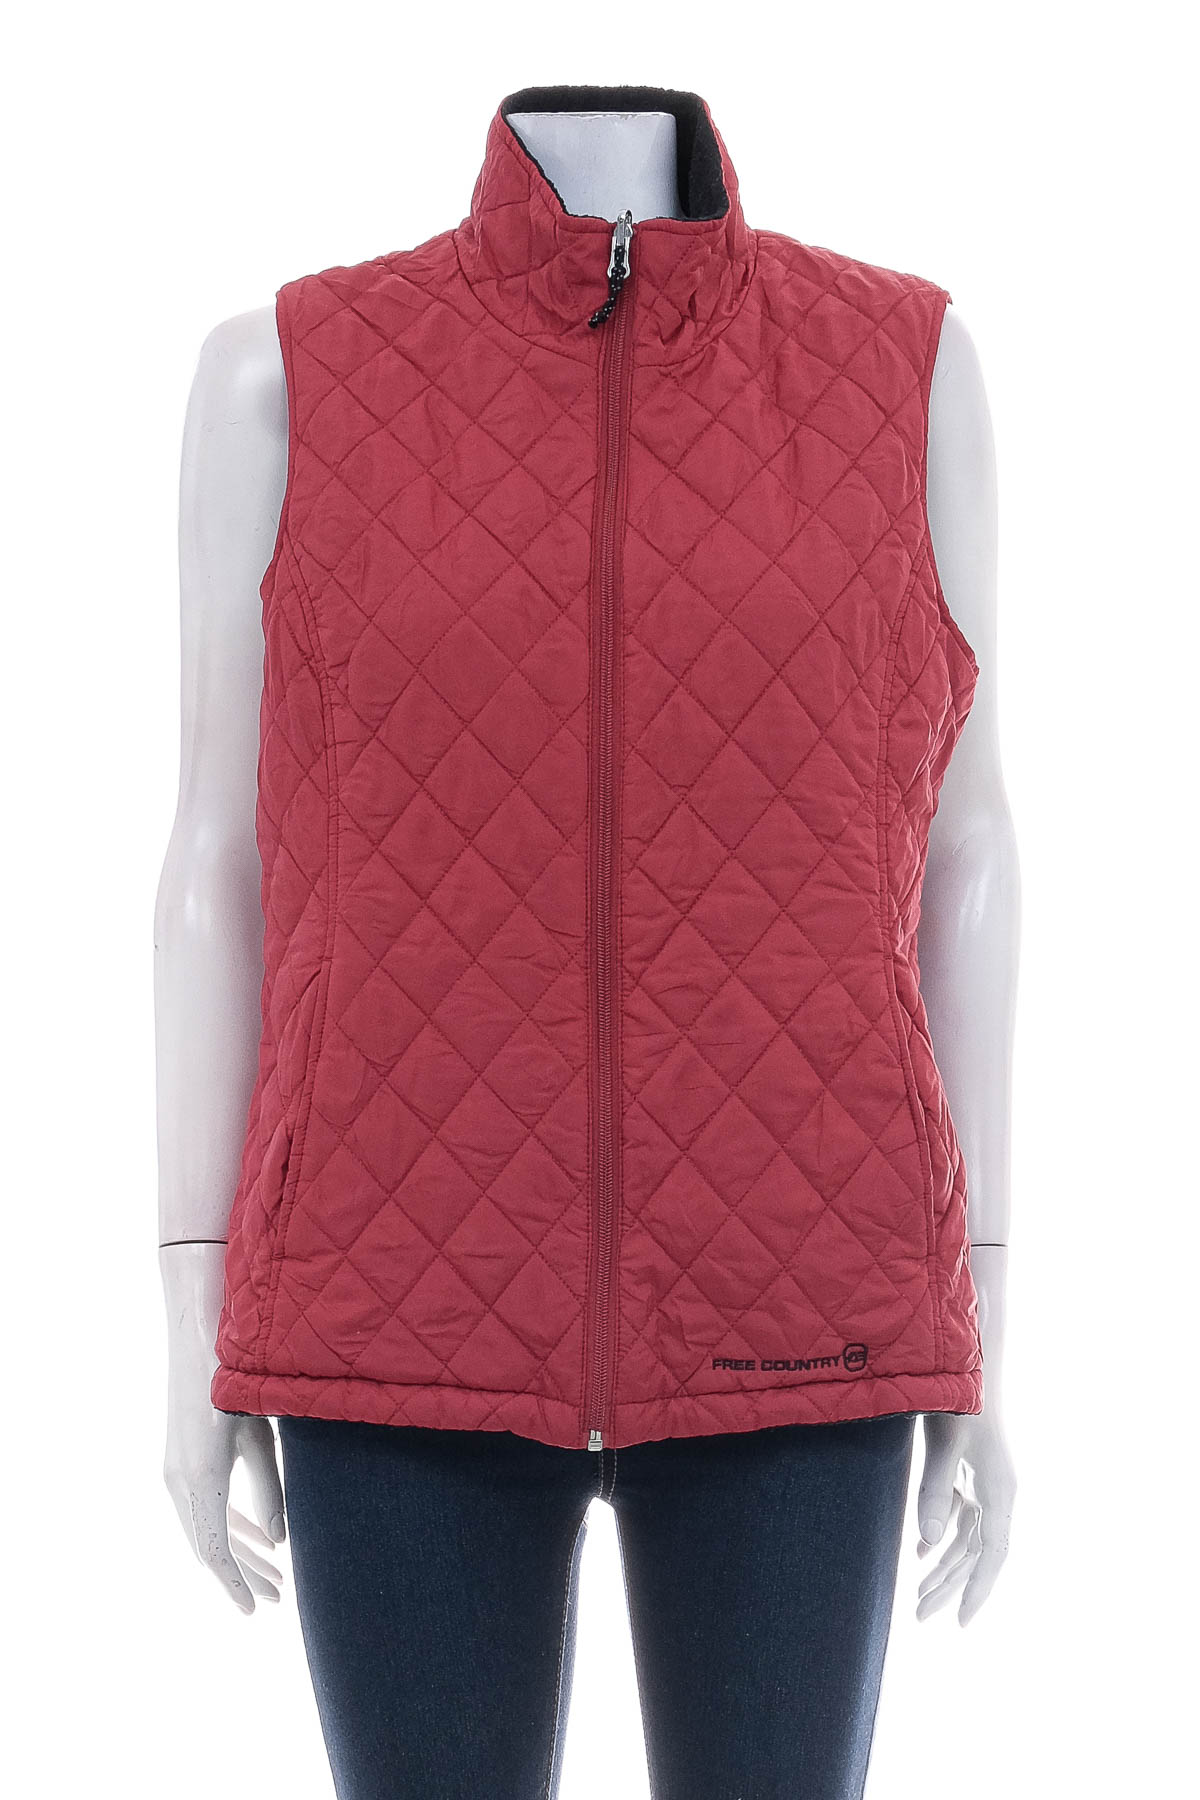 Women's reversible vest - Free Country - 0